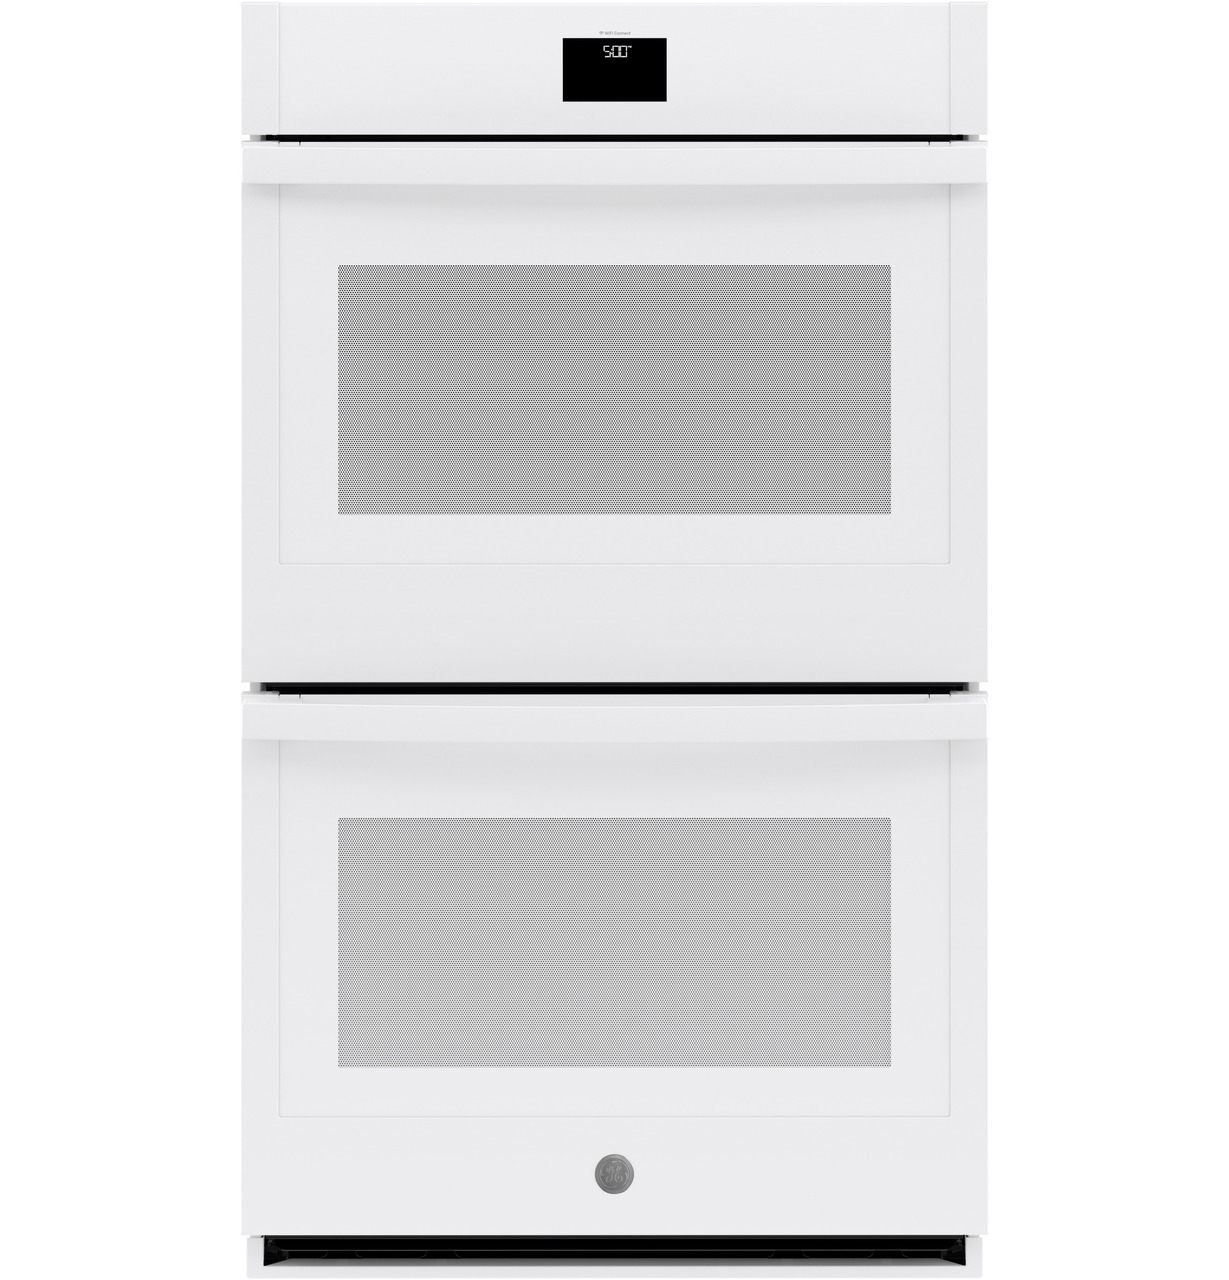 GE self-cleaning, Smart convection double wall oven.